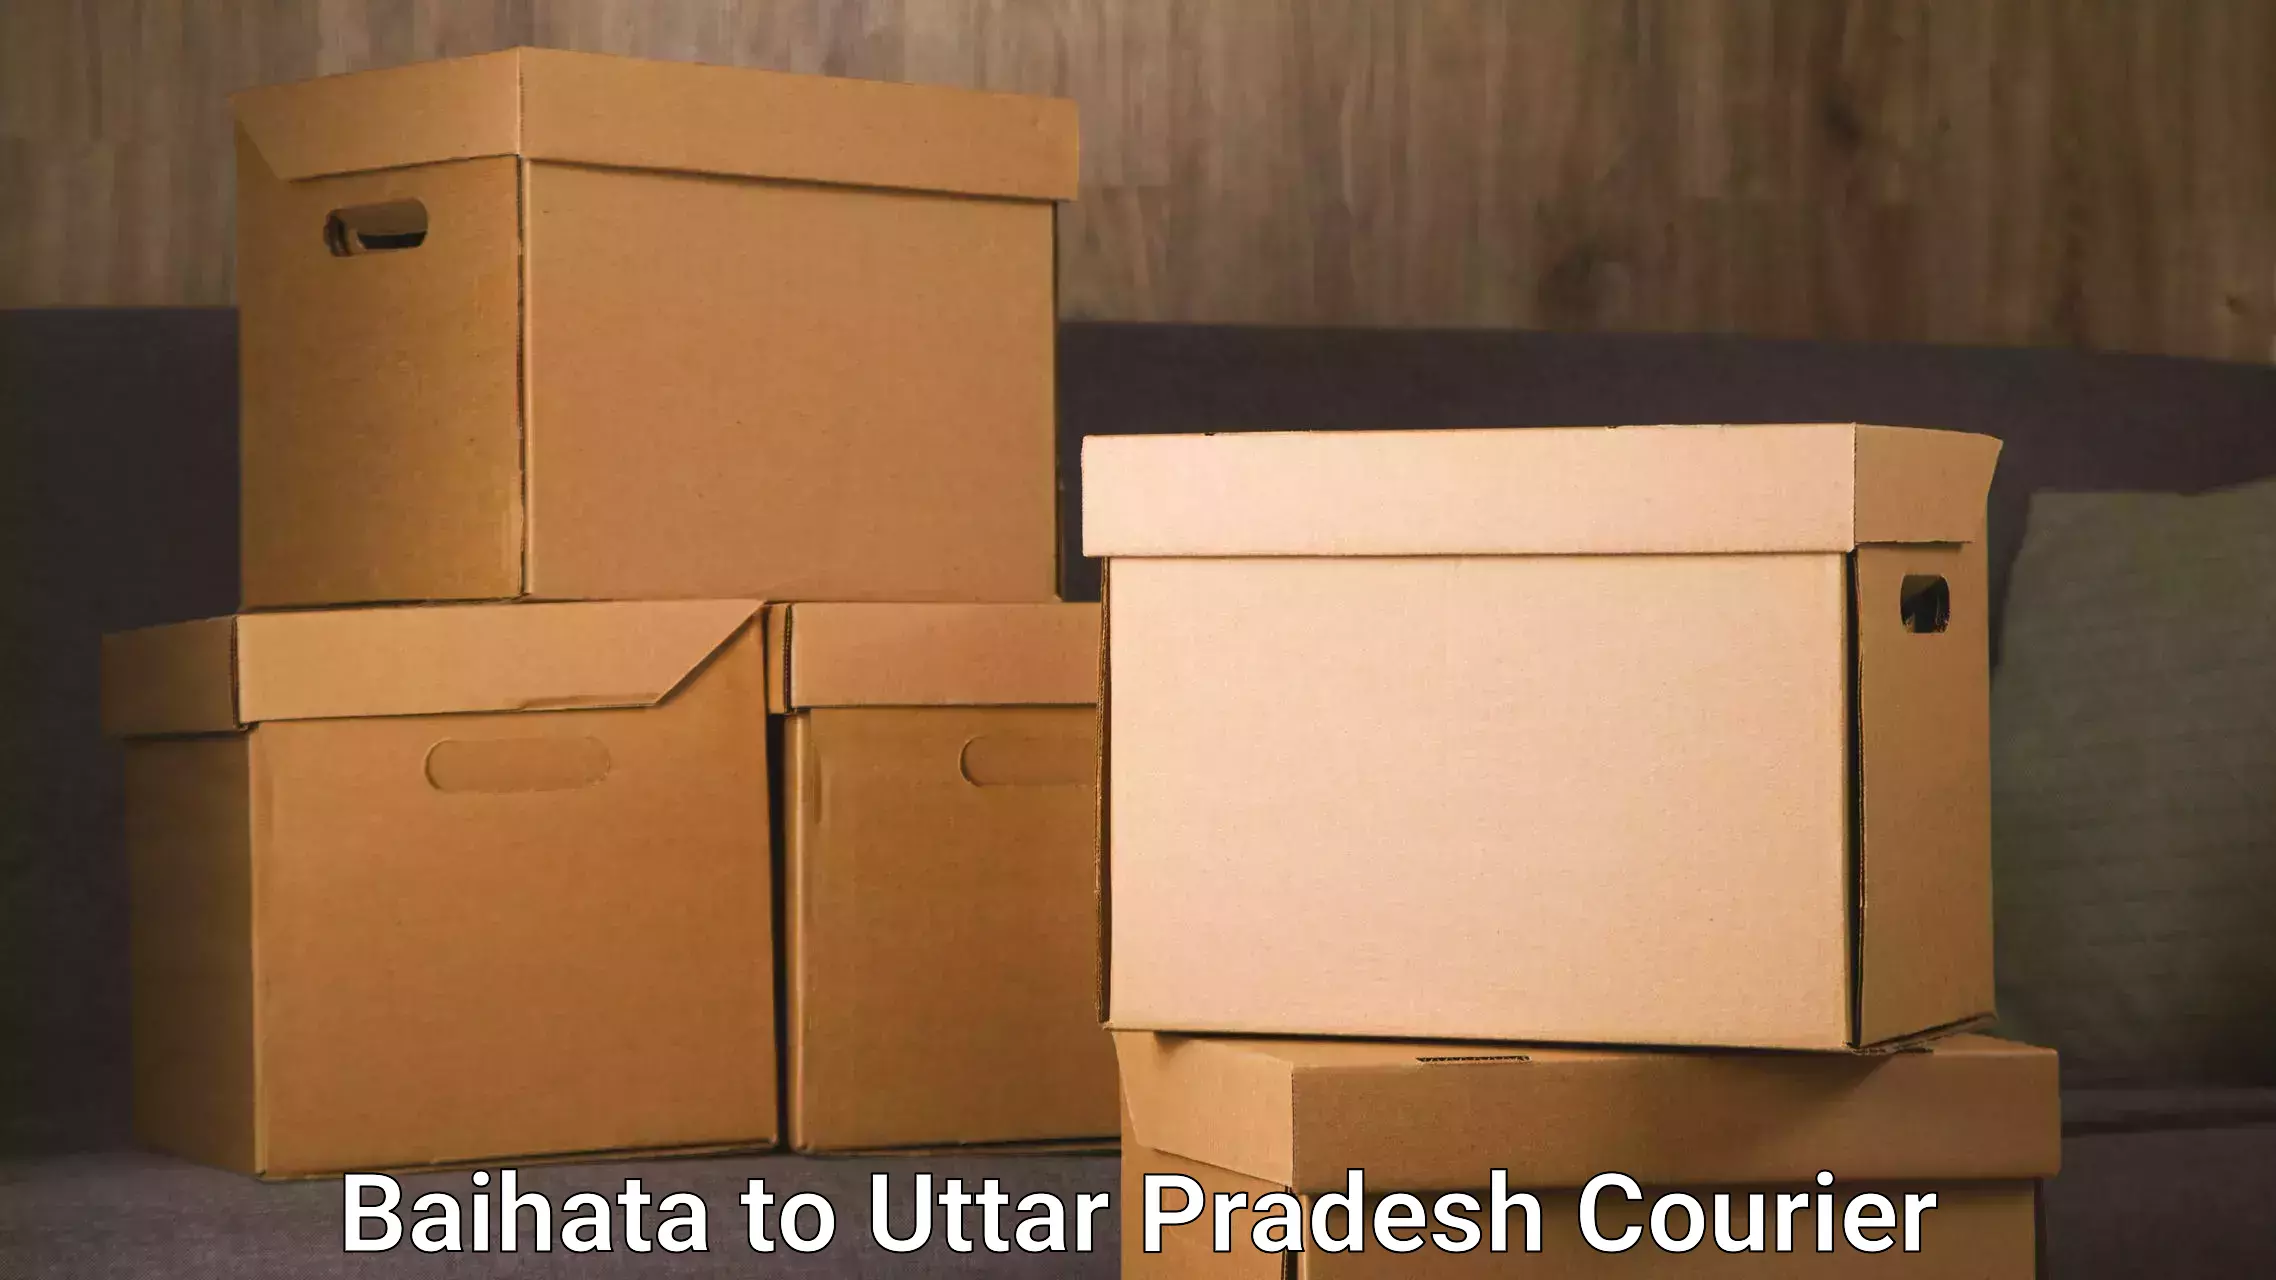 State-of-the-art courier technology Baihata to Sikandara